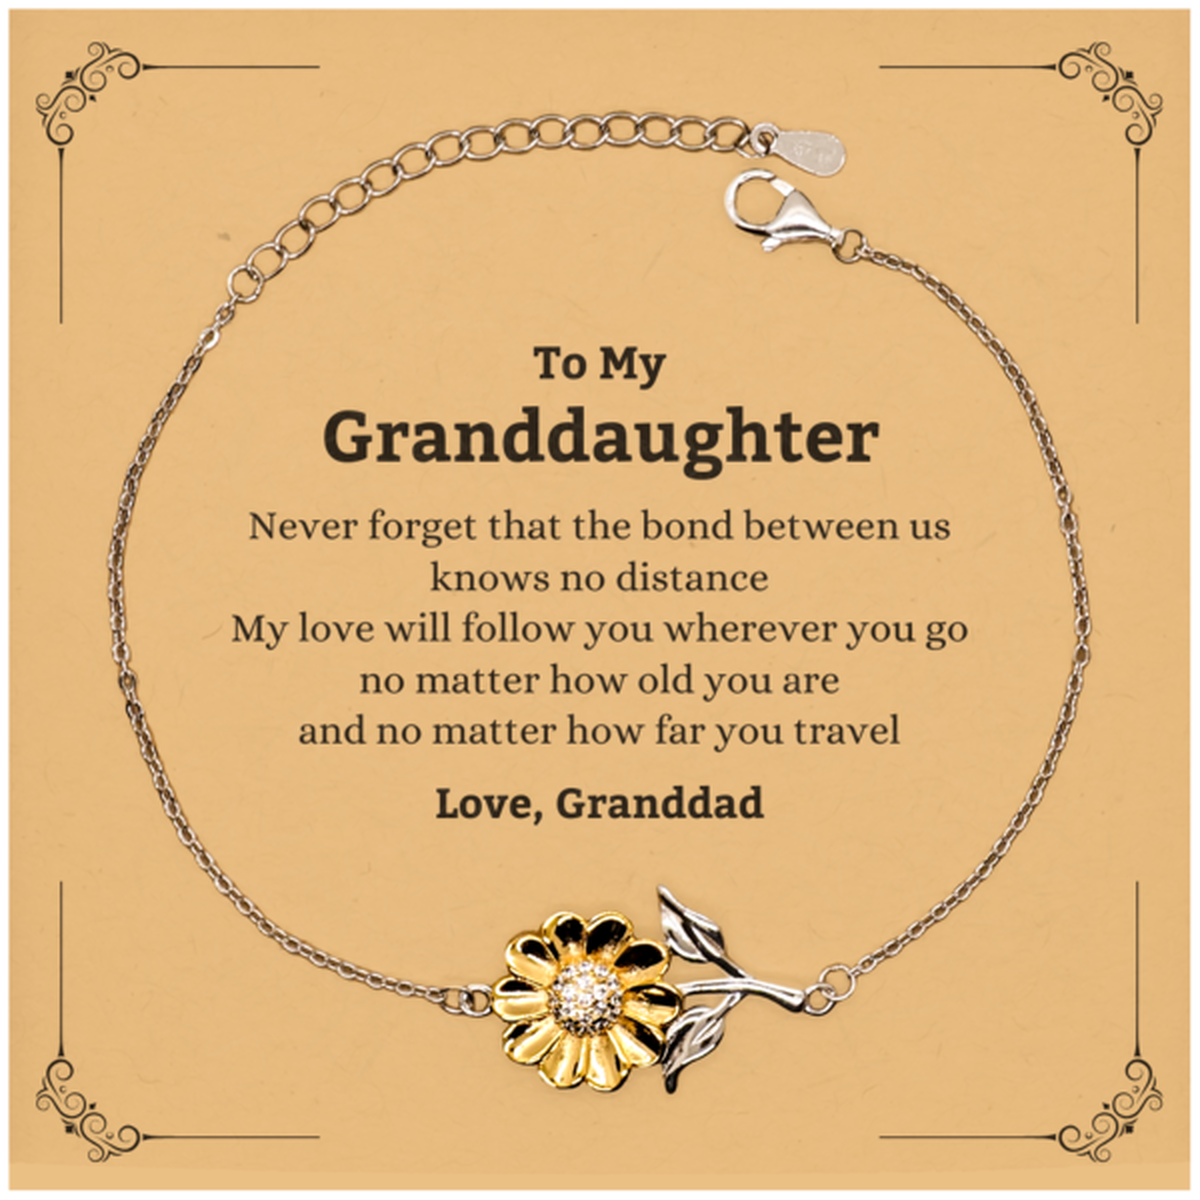 Granddaughter Birthday Gifts from Granddad, Adjustable Sunflower Bracelet for Granddaughter Christmas Graduation Unique Gifts Granddaughter Never forget that the bond between us knows no distance. Love, Granddad